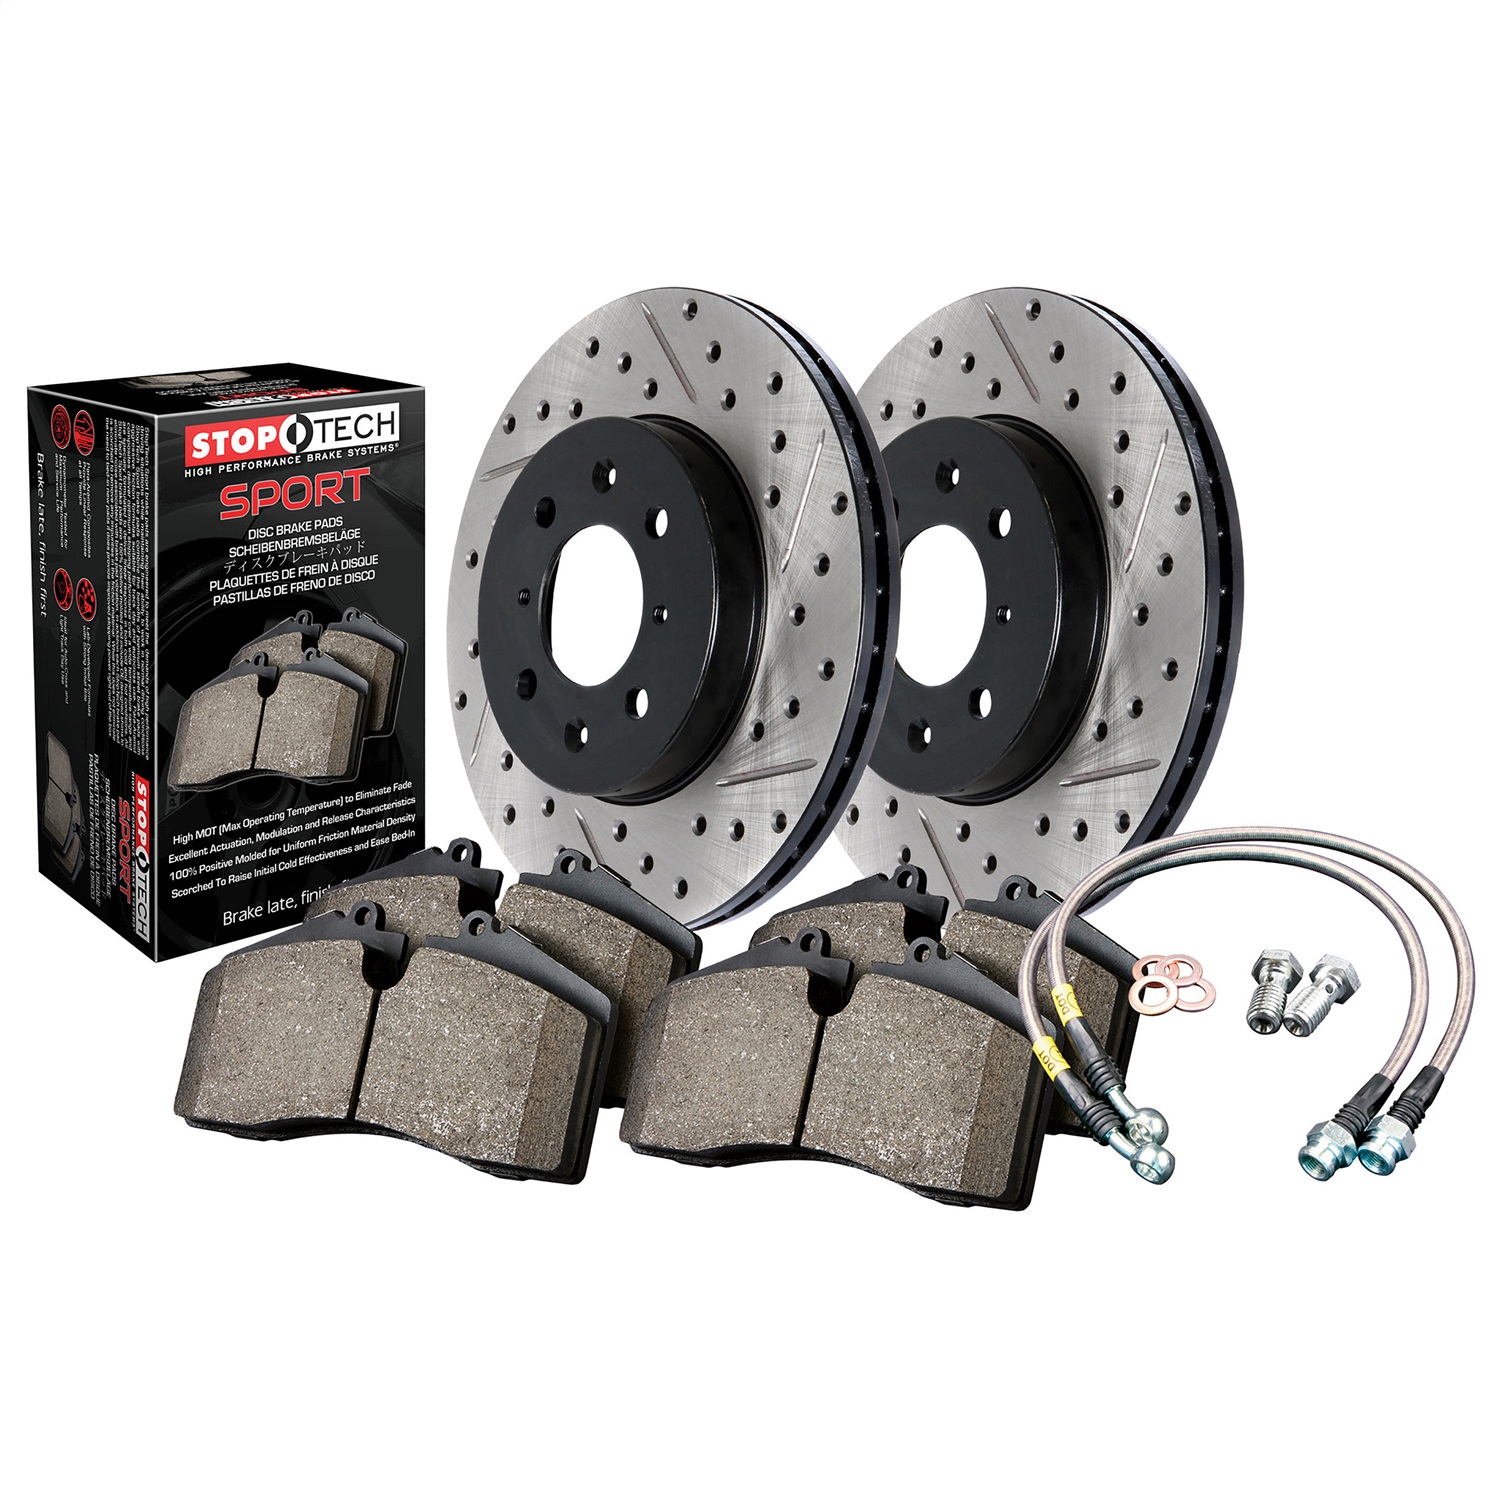 StopTech 978.47021F Sport Disc Brake Kit w/Cross-Drilled And Slotted Rotors